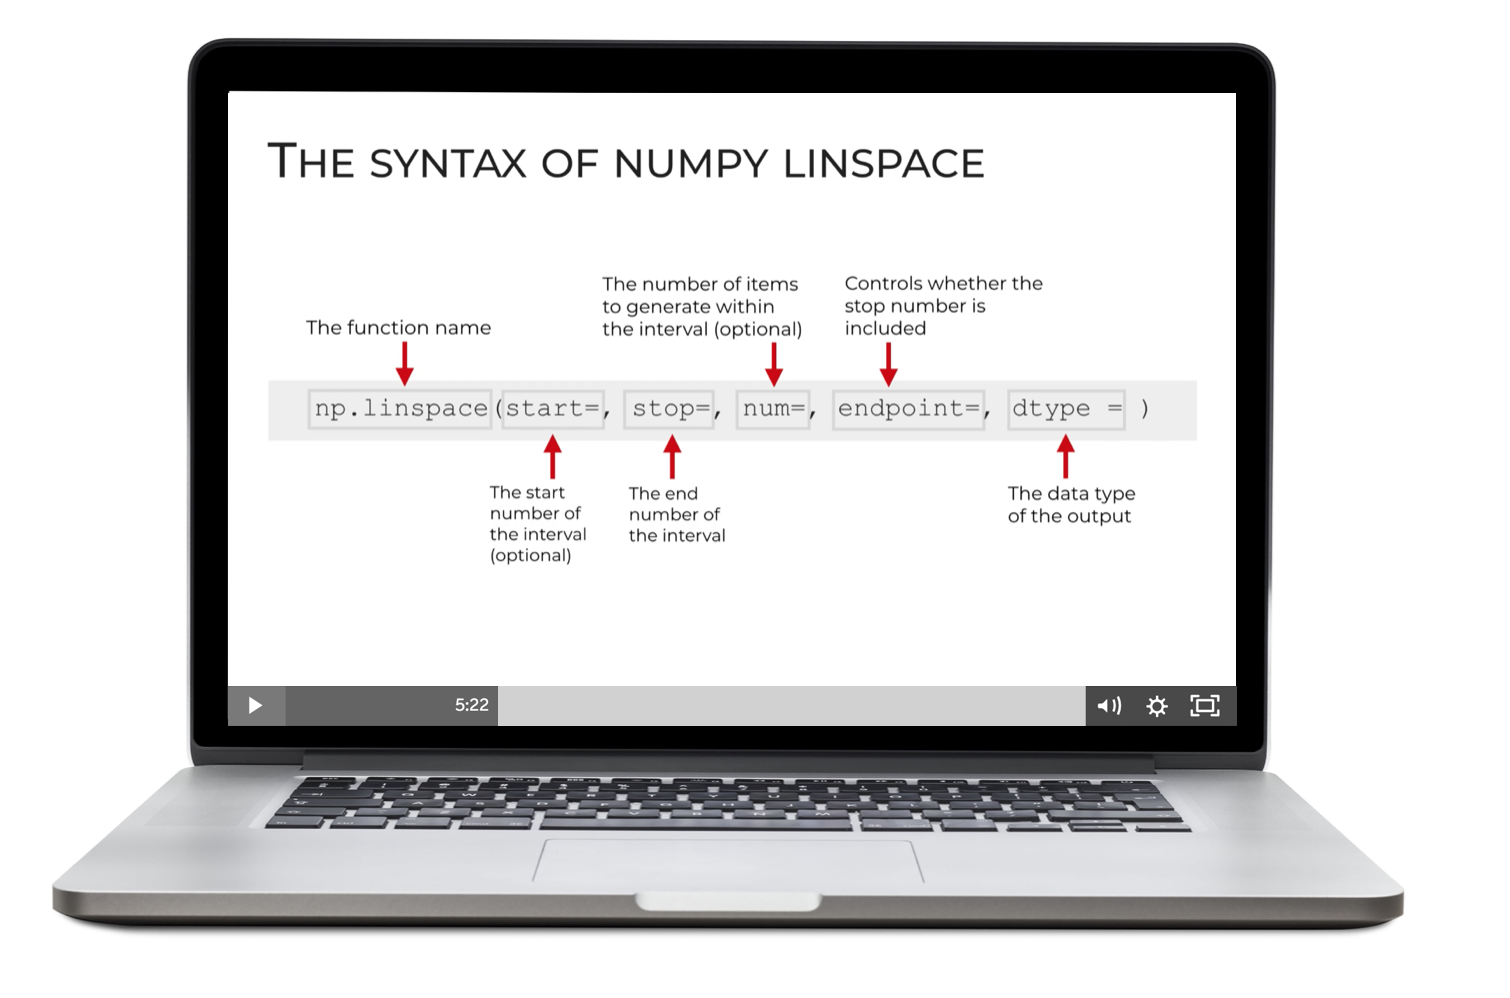 An image that shows a laptop with a video explaining the syntax of Numpy Linspace